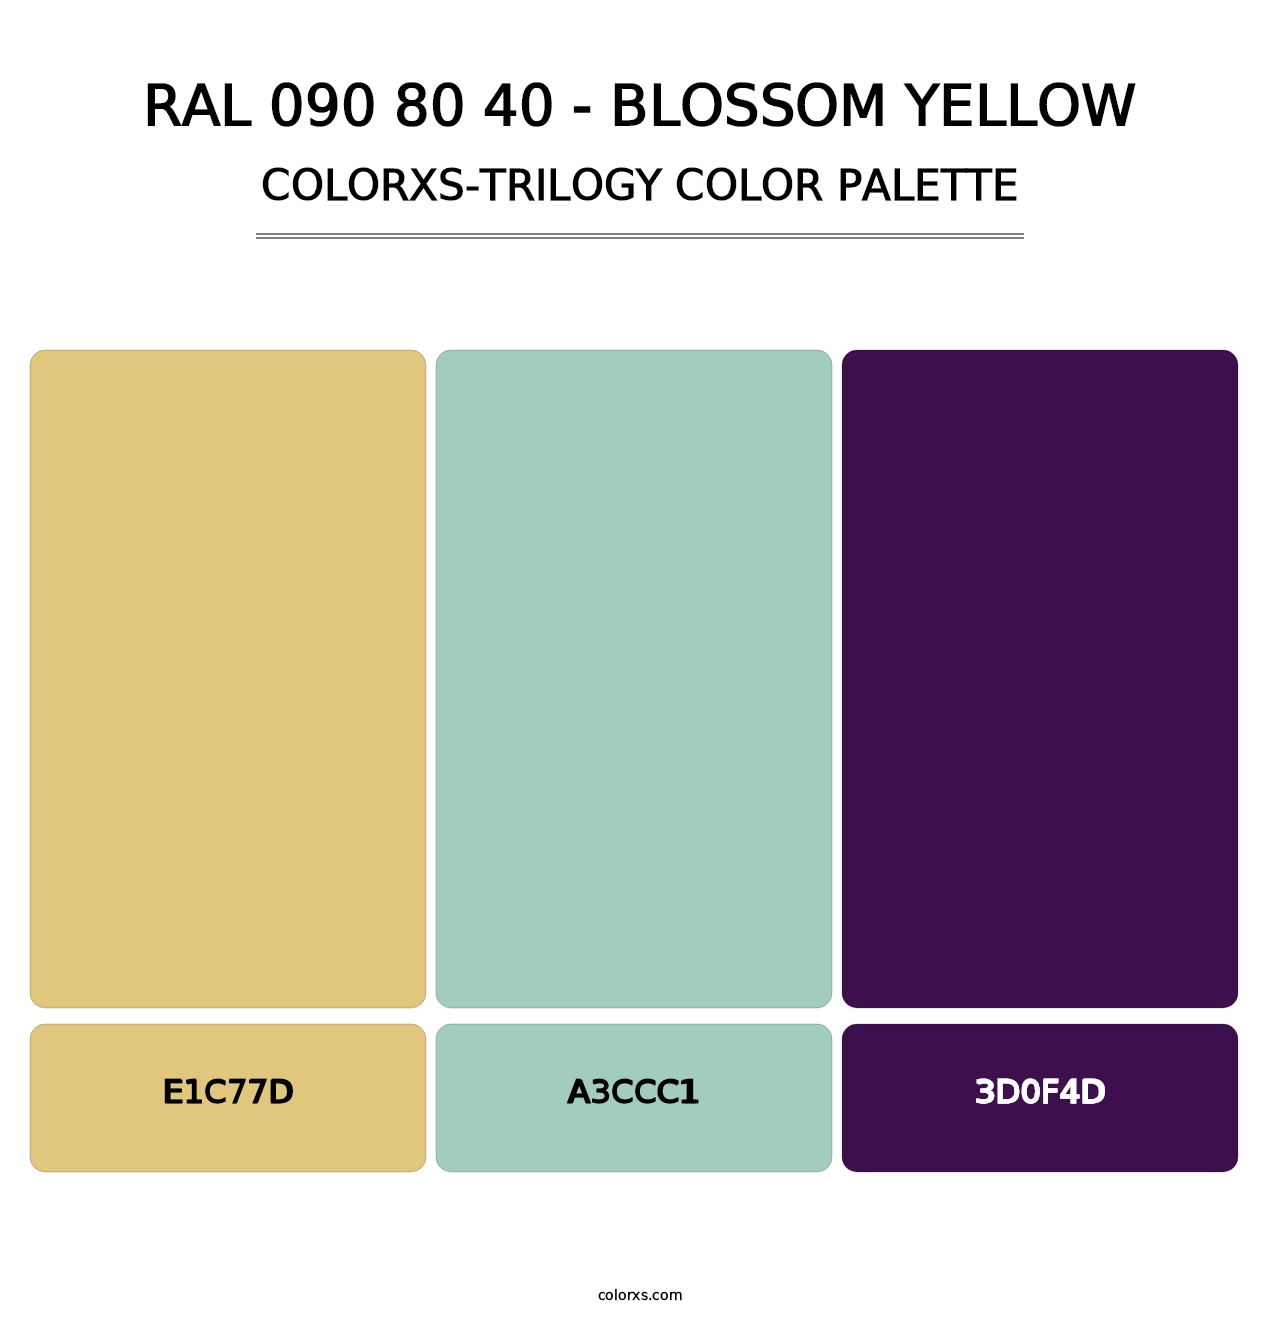 RAL 090 80 40 - Blossom Yellow - Colorxs Trilogy Palette